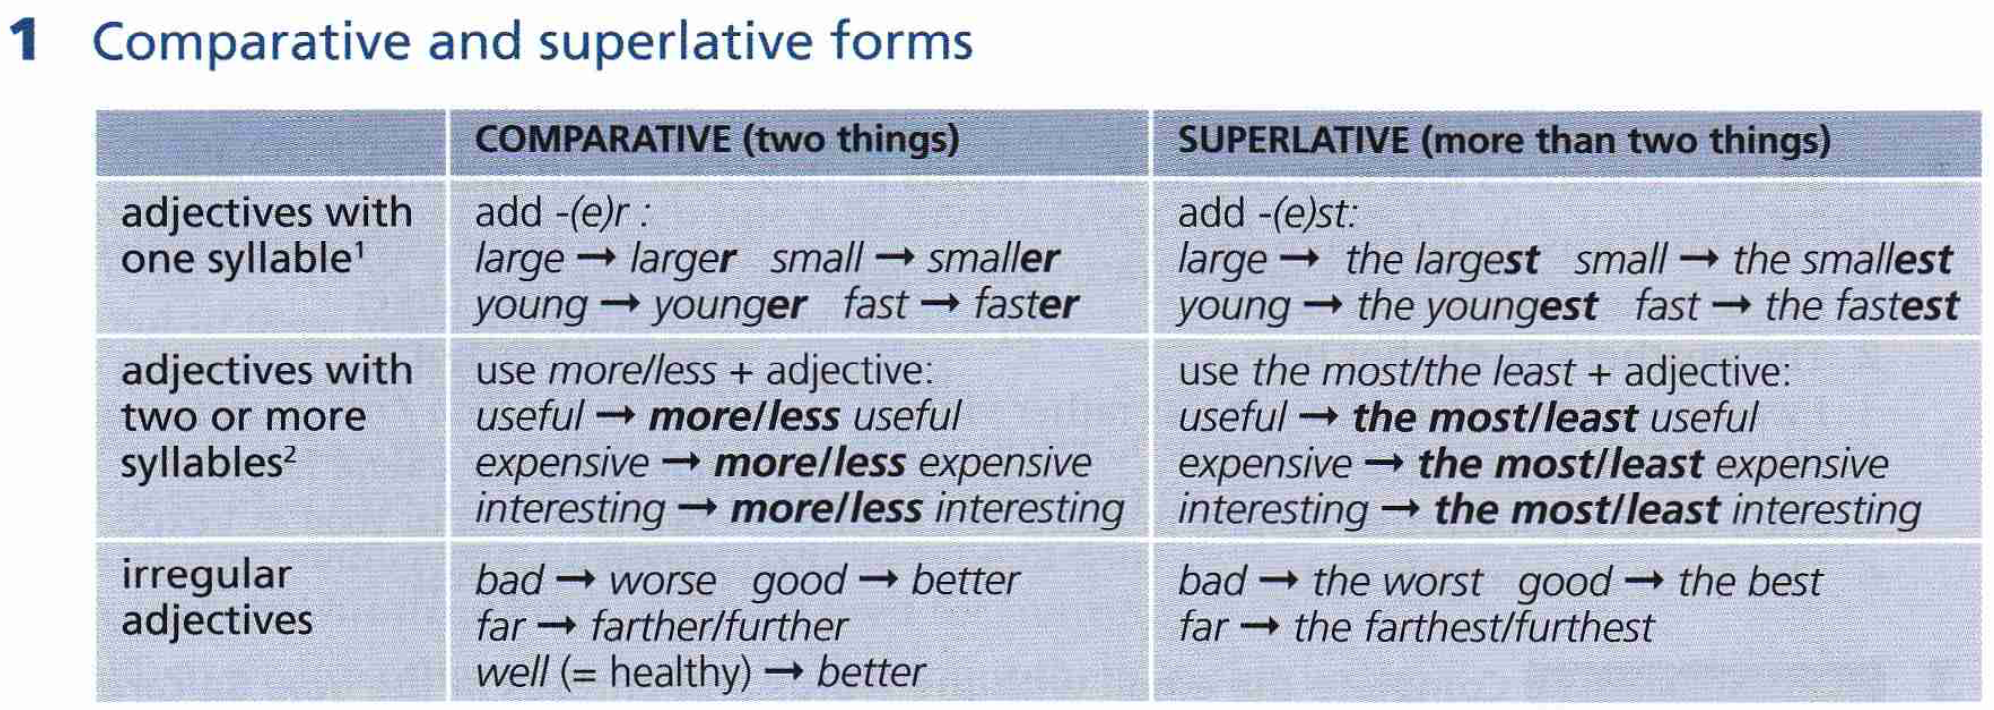 Less comparative form. Comparatives and Superlatives правило. Таблица Comparative and Superlative. Comparative and Superlative adjectives правило. Degrees of Comparison of adjectives таблица.